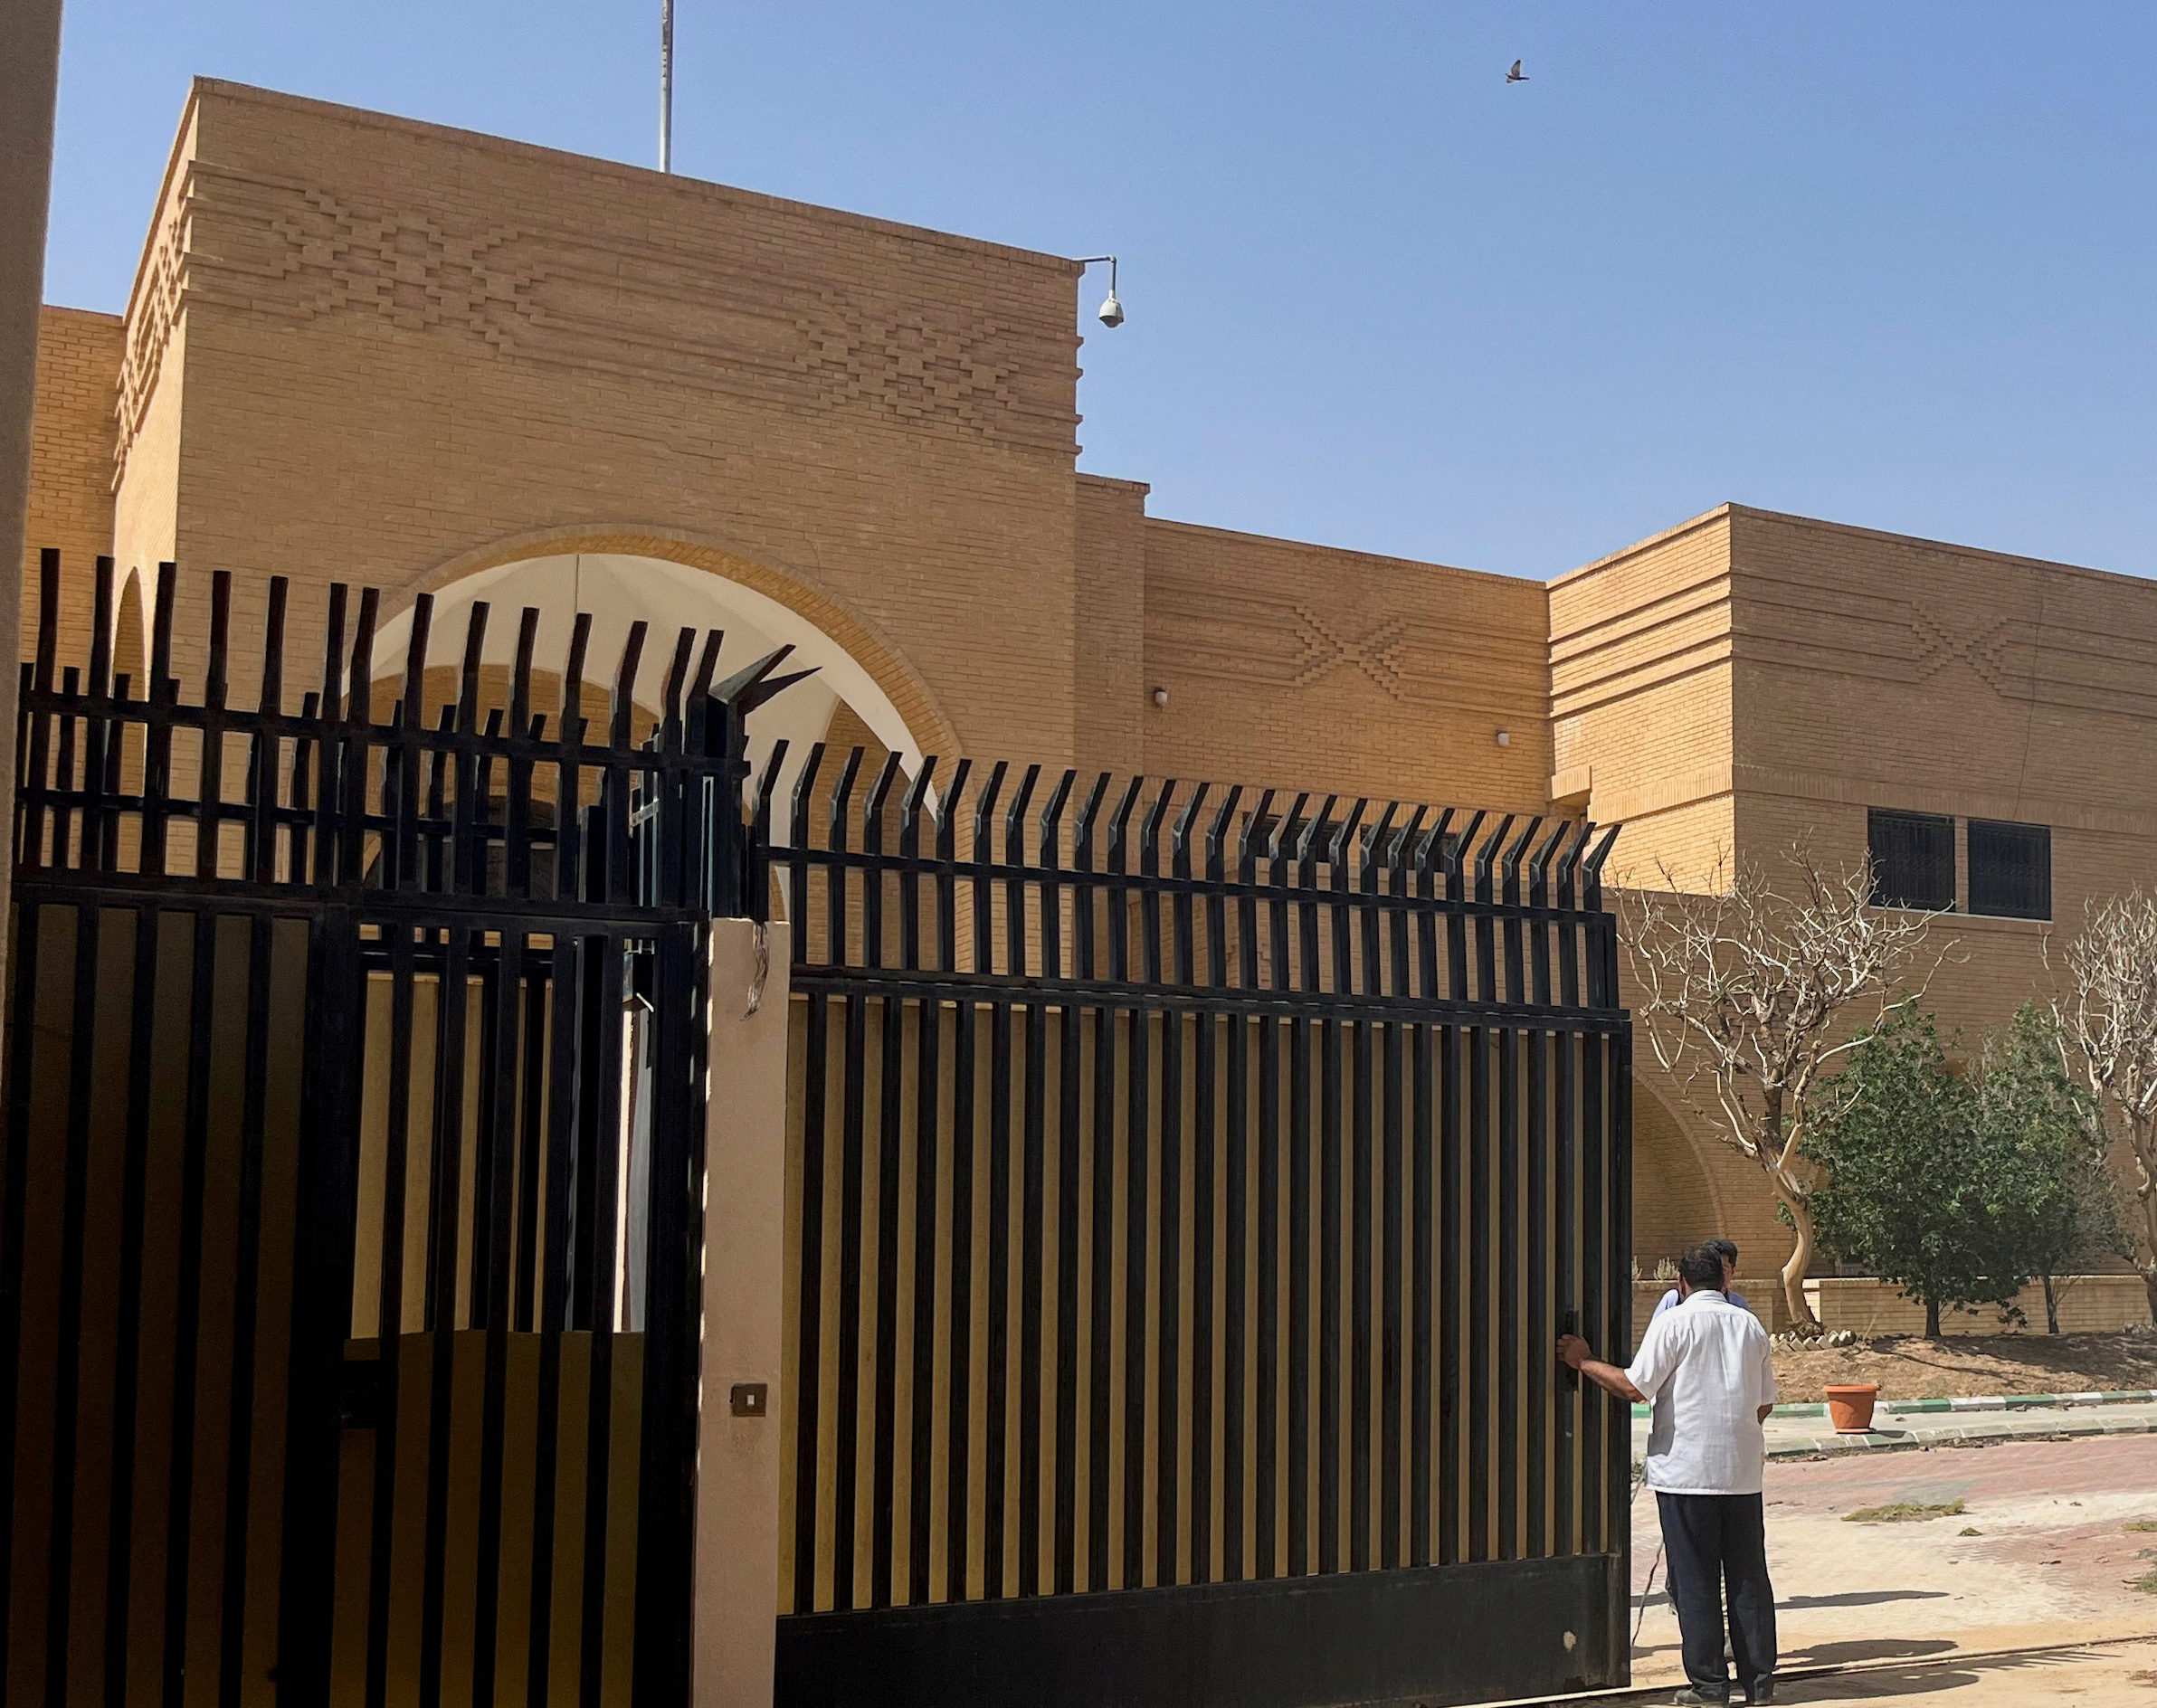 Iran's embassy in Riyadh opens gates for first time in years